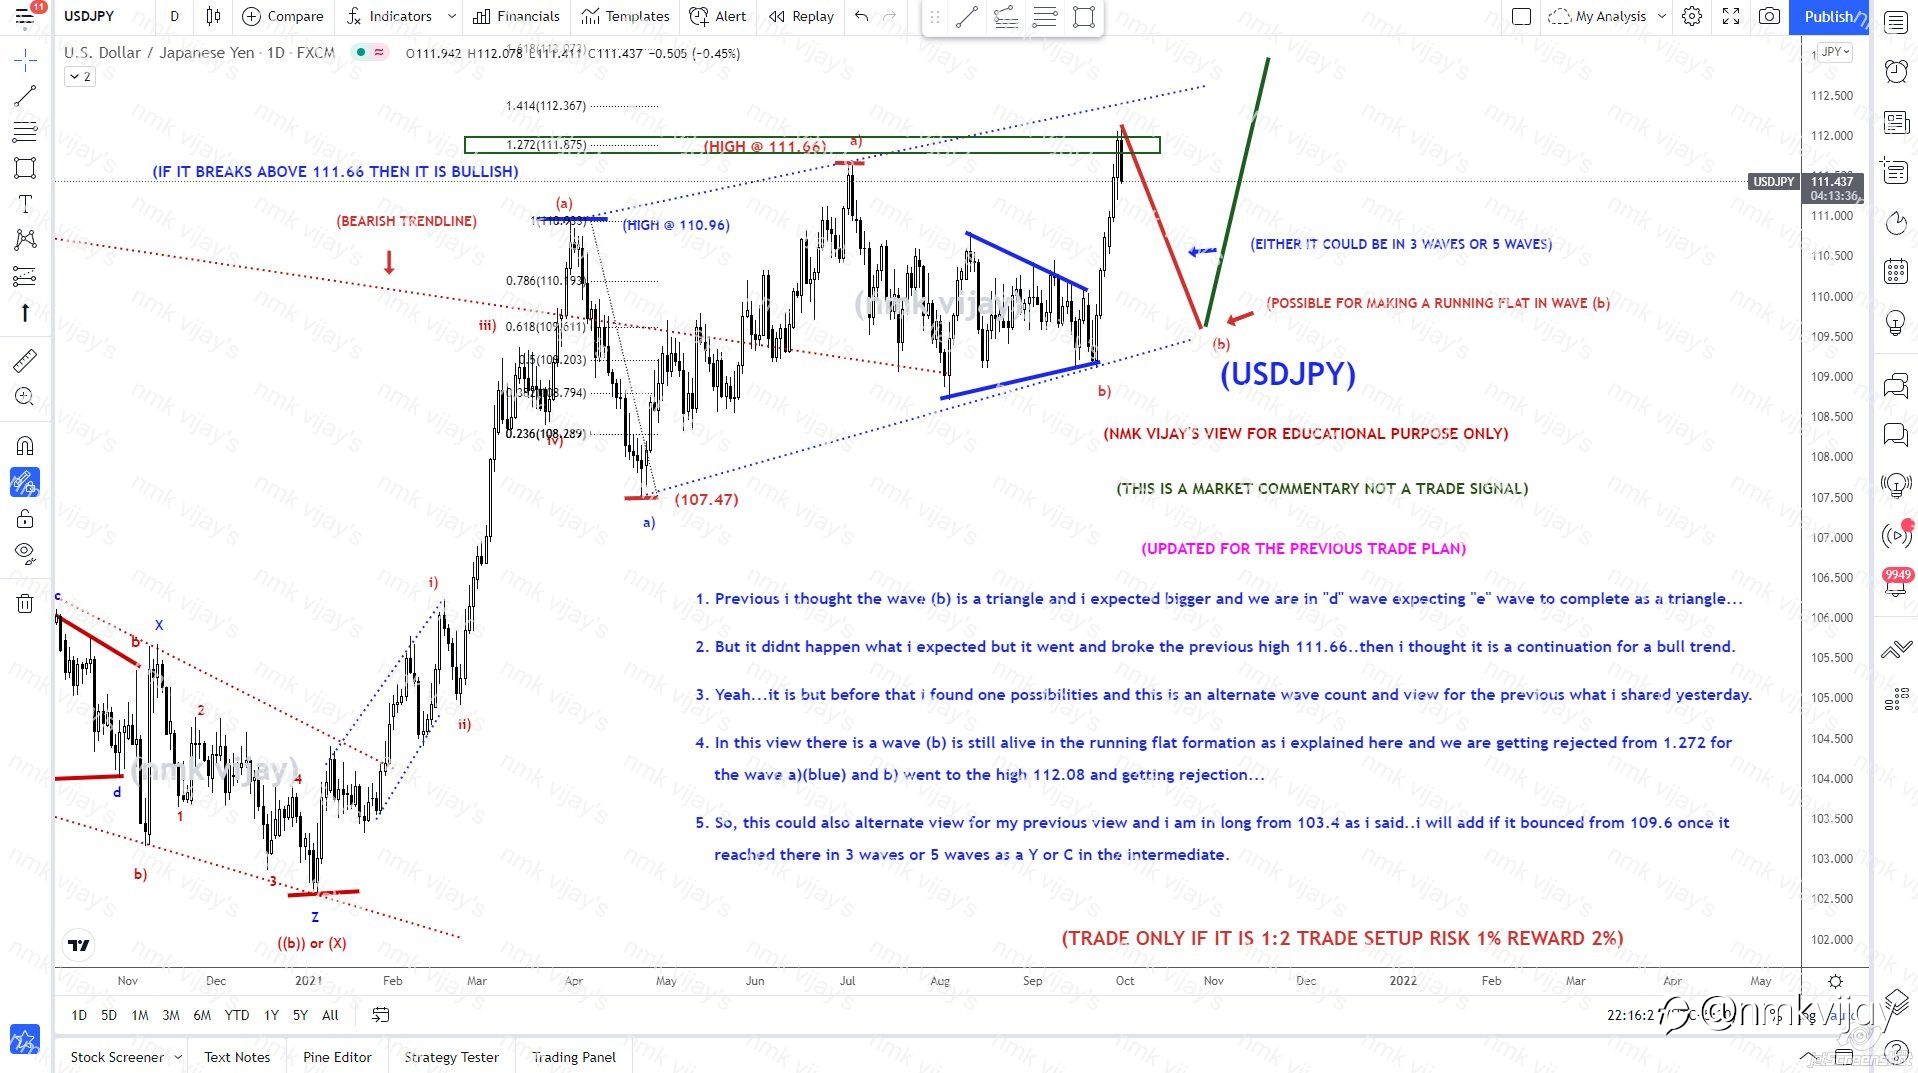 USDJPY-Expecting (b) wave to complete as a running flat in 109.6